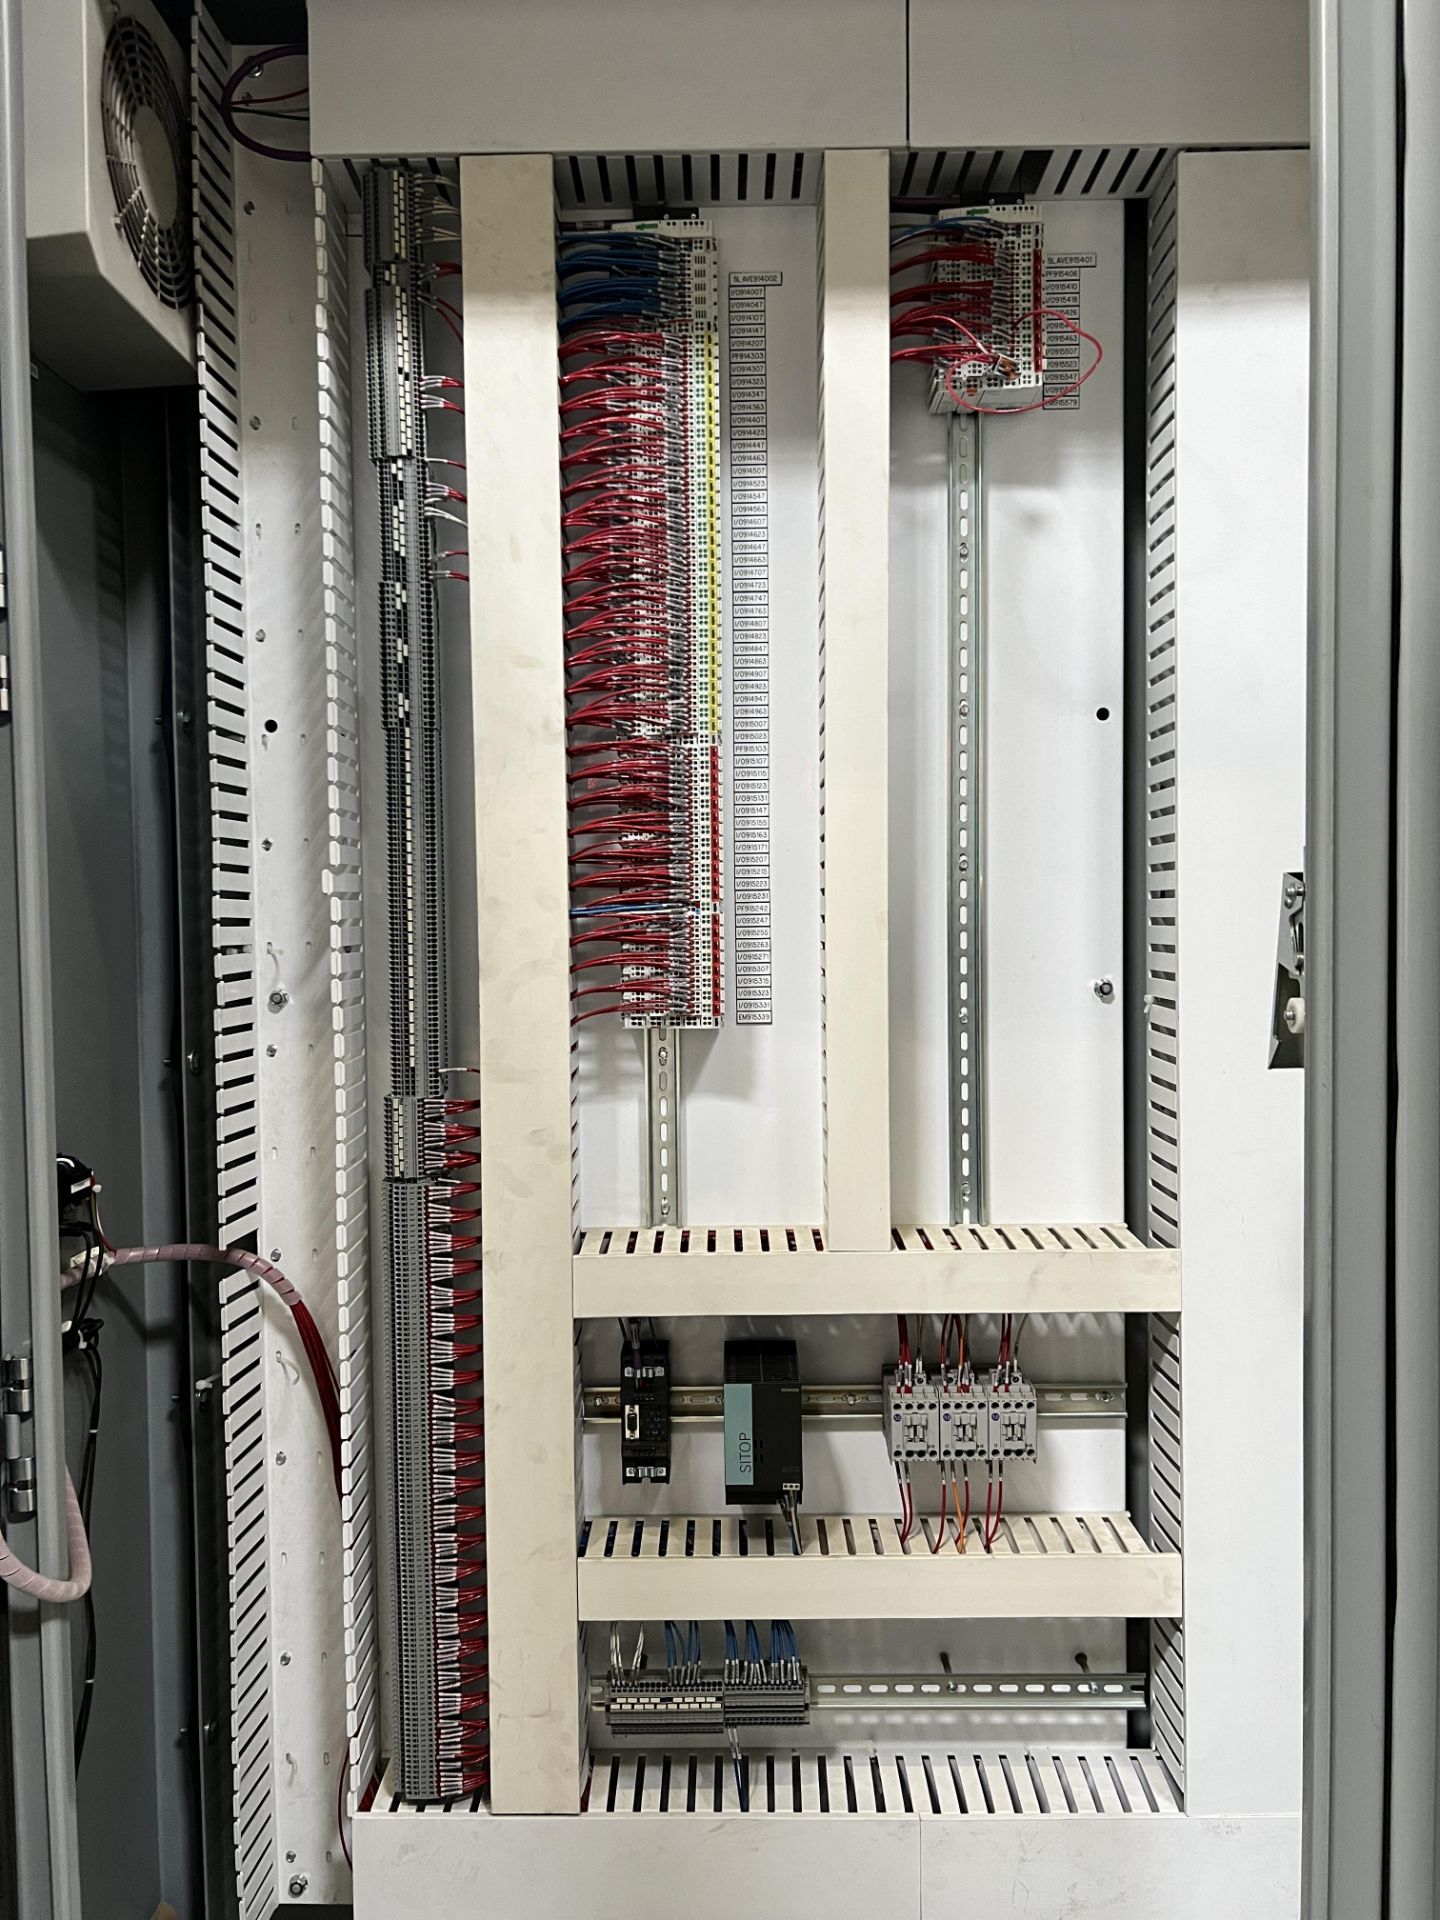 Intelligreated Control Panel 480VAC, 3 Phase, 3 Doors - Image 7 of 9